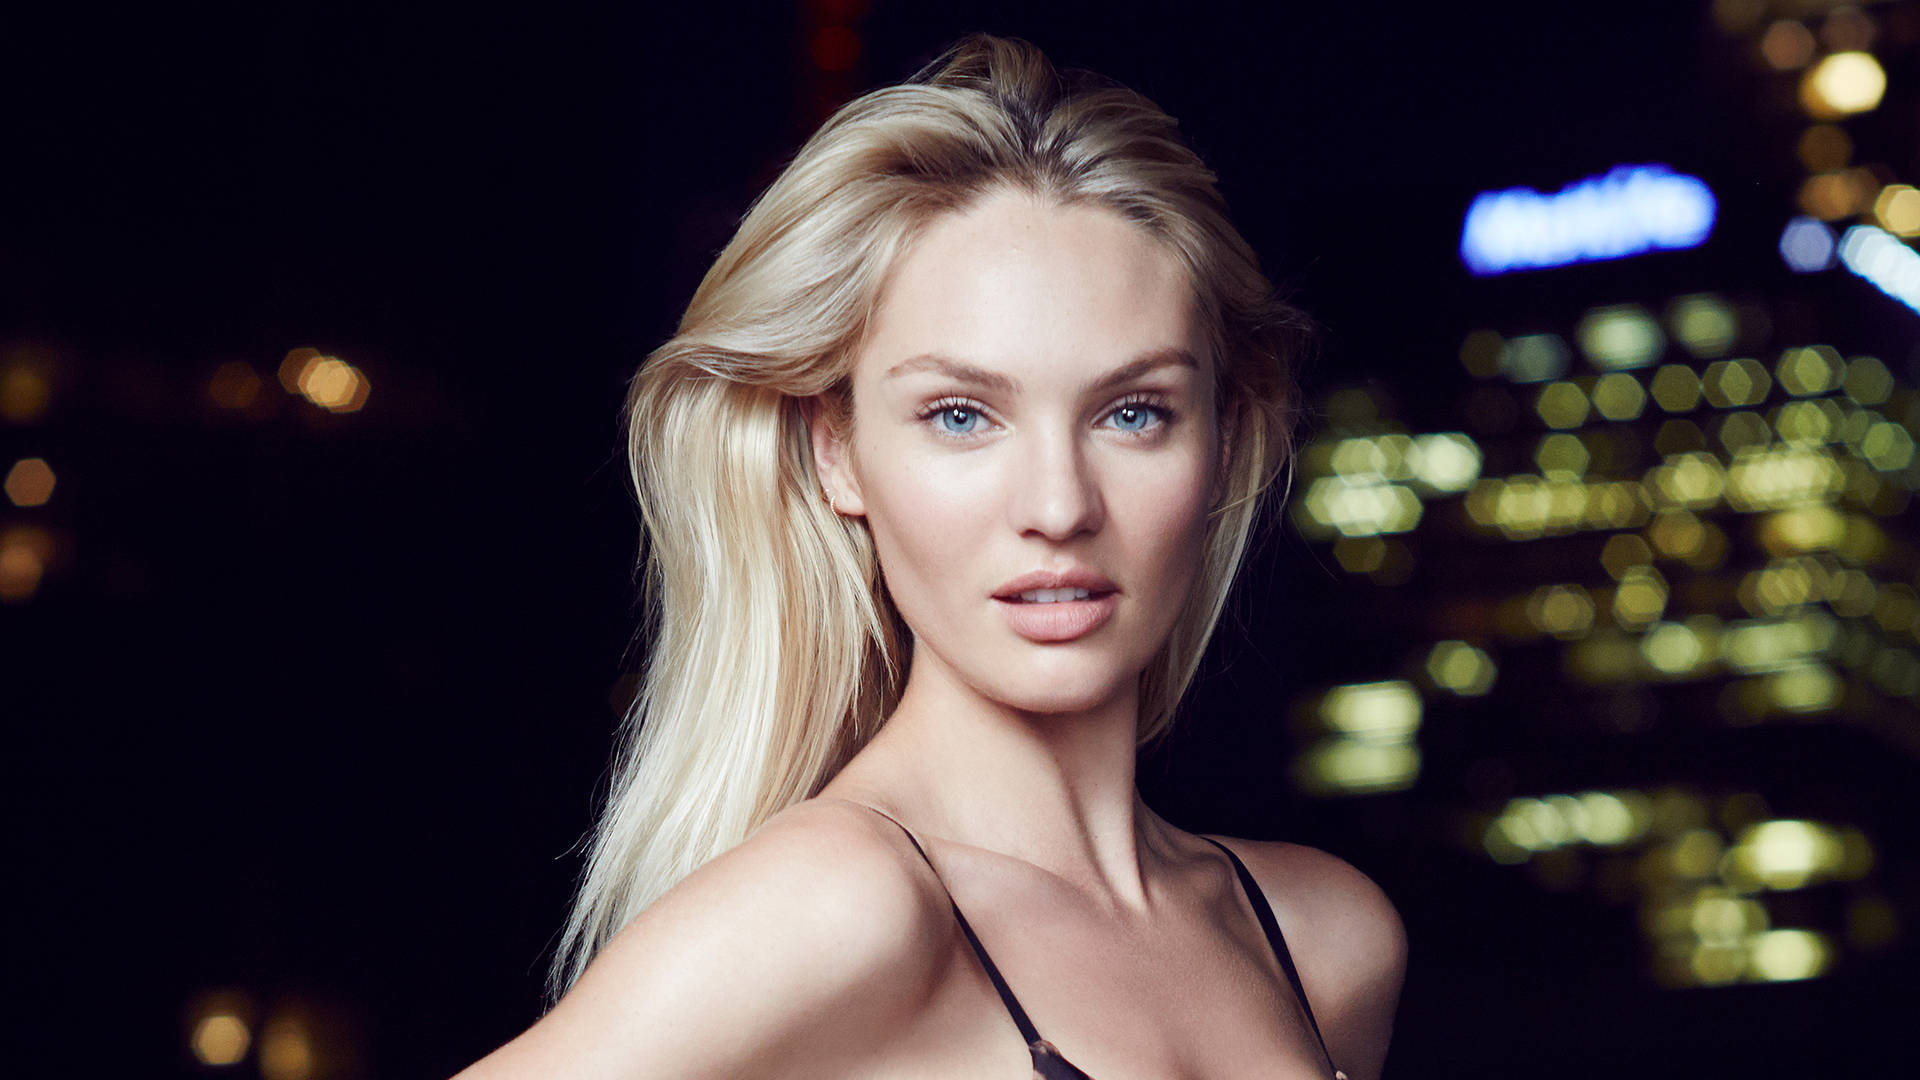 Candice Swanepoel City Lights Photography Background